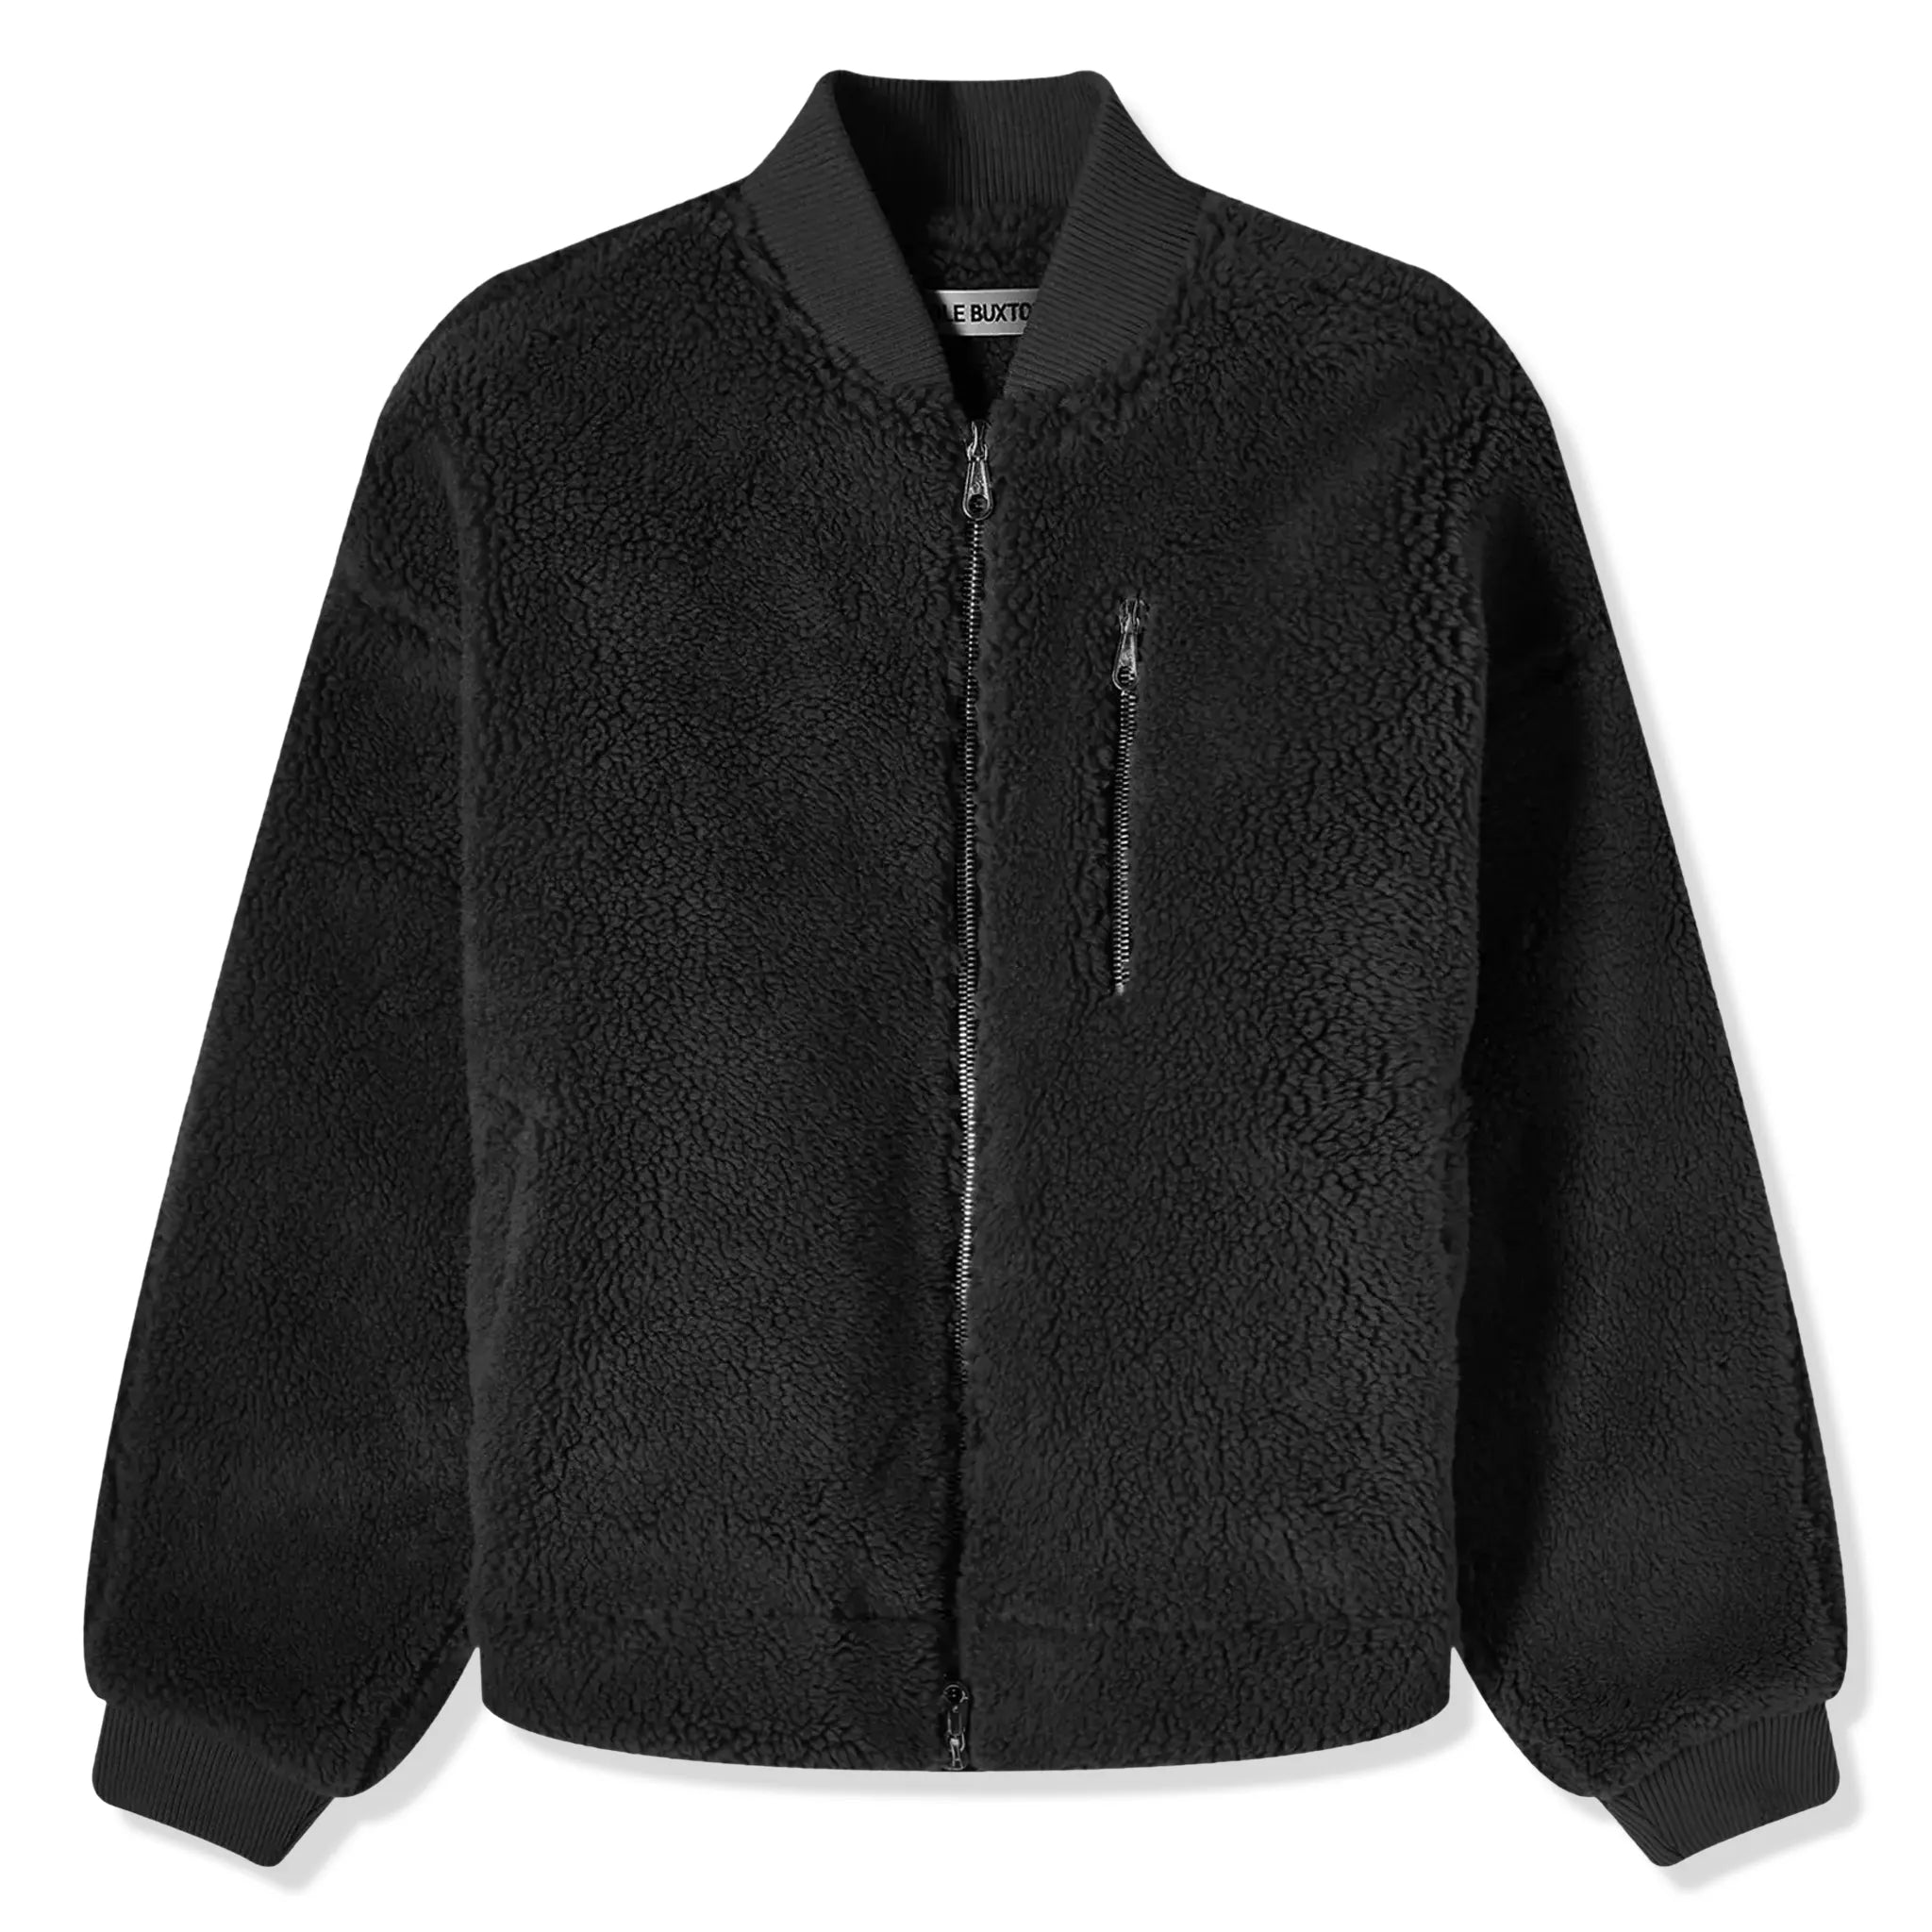 Front view of Cole Buxton Wool Fleece Black Bomber Jacket aw23flb001-000